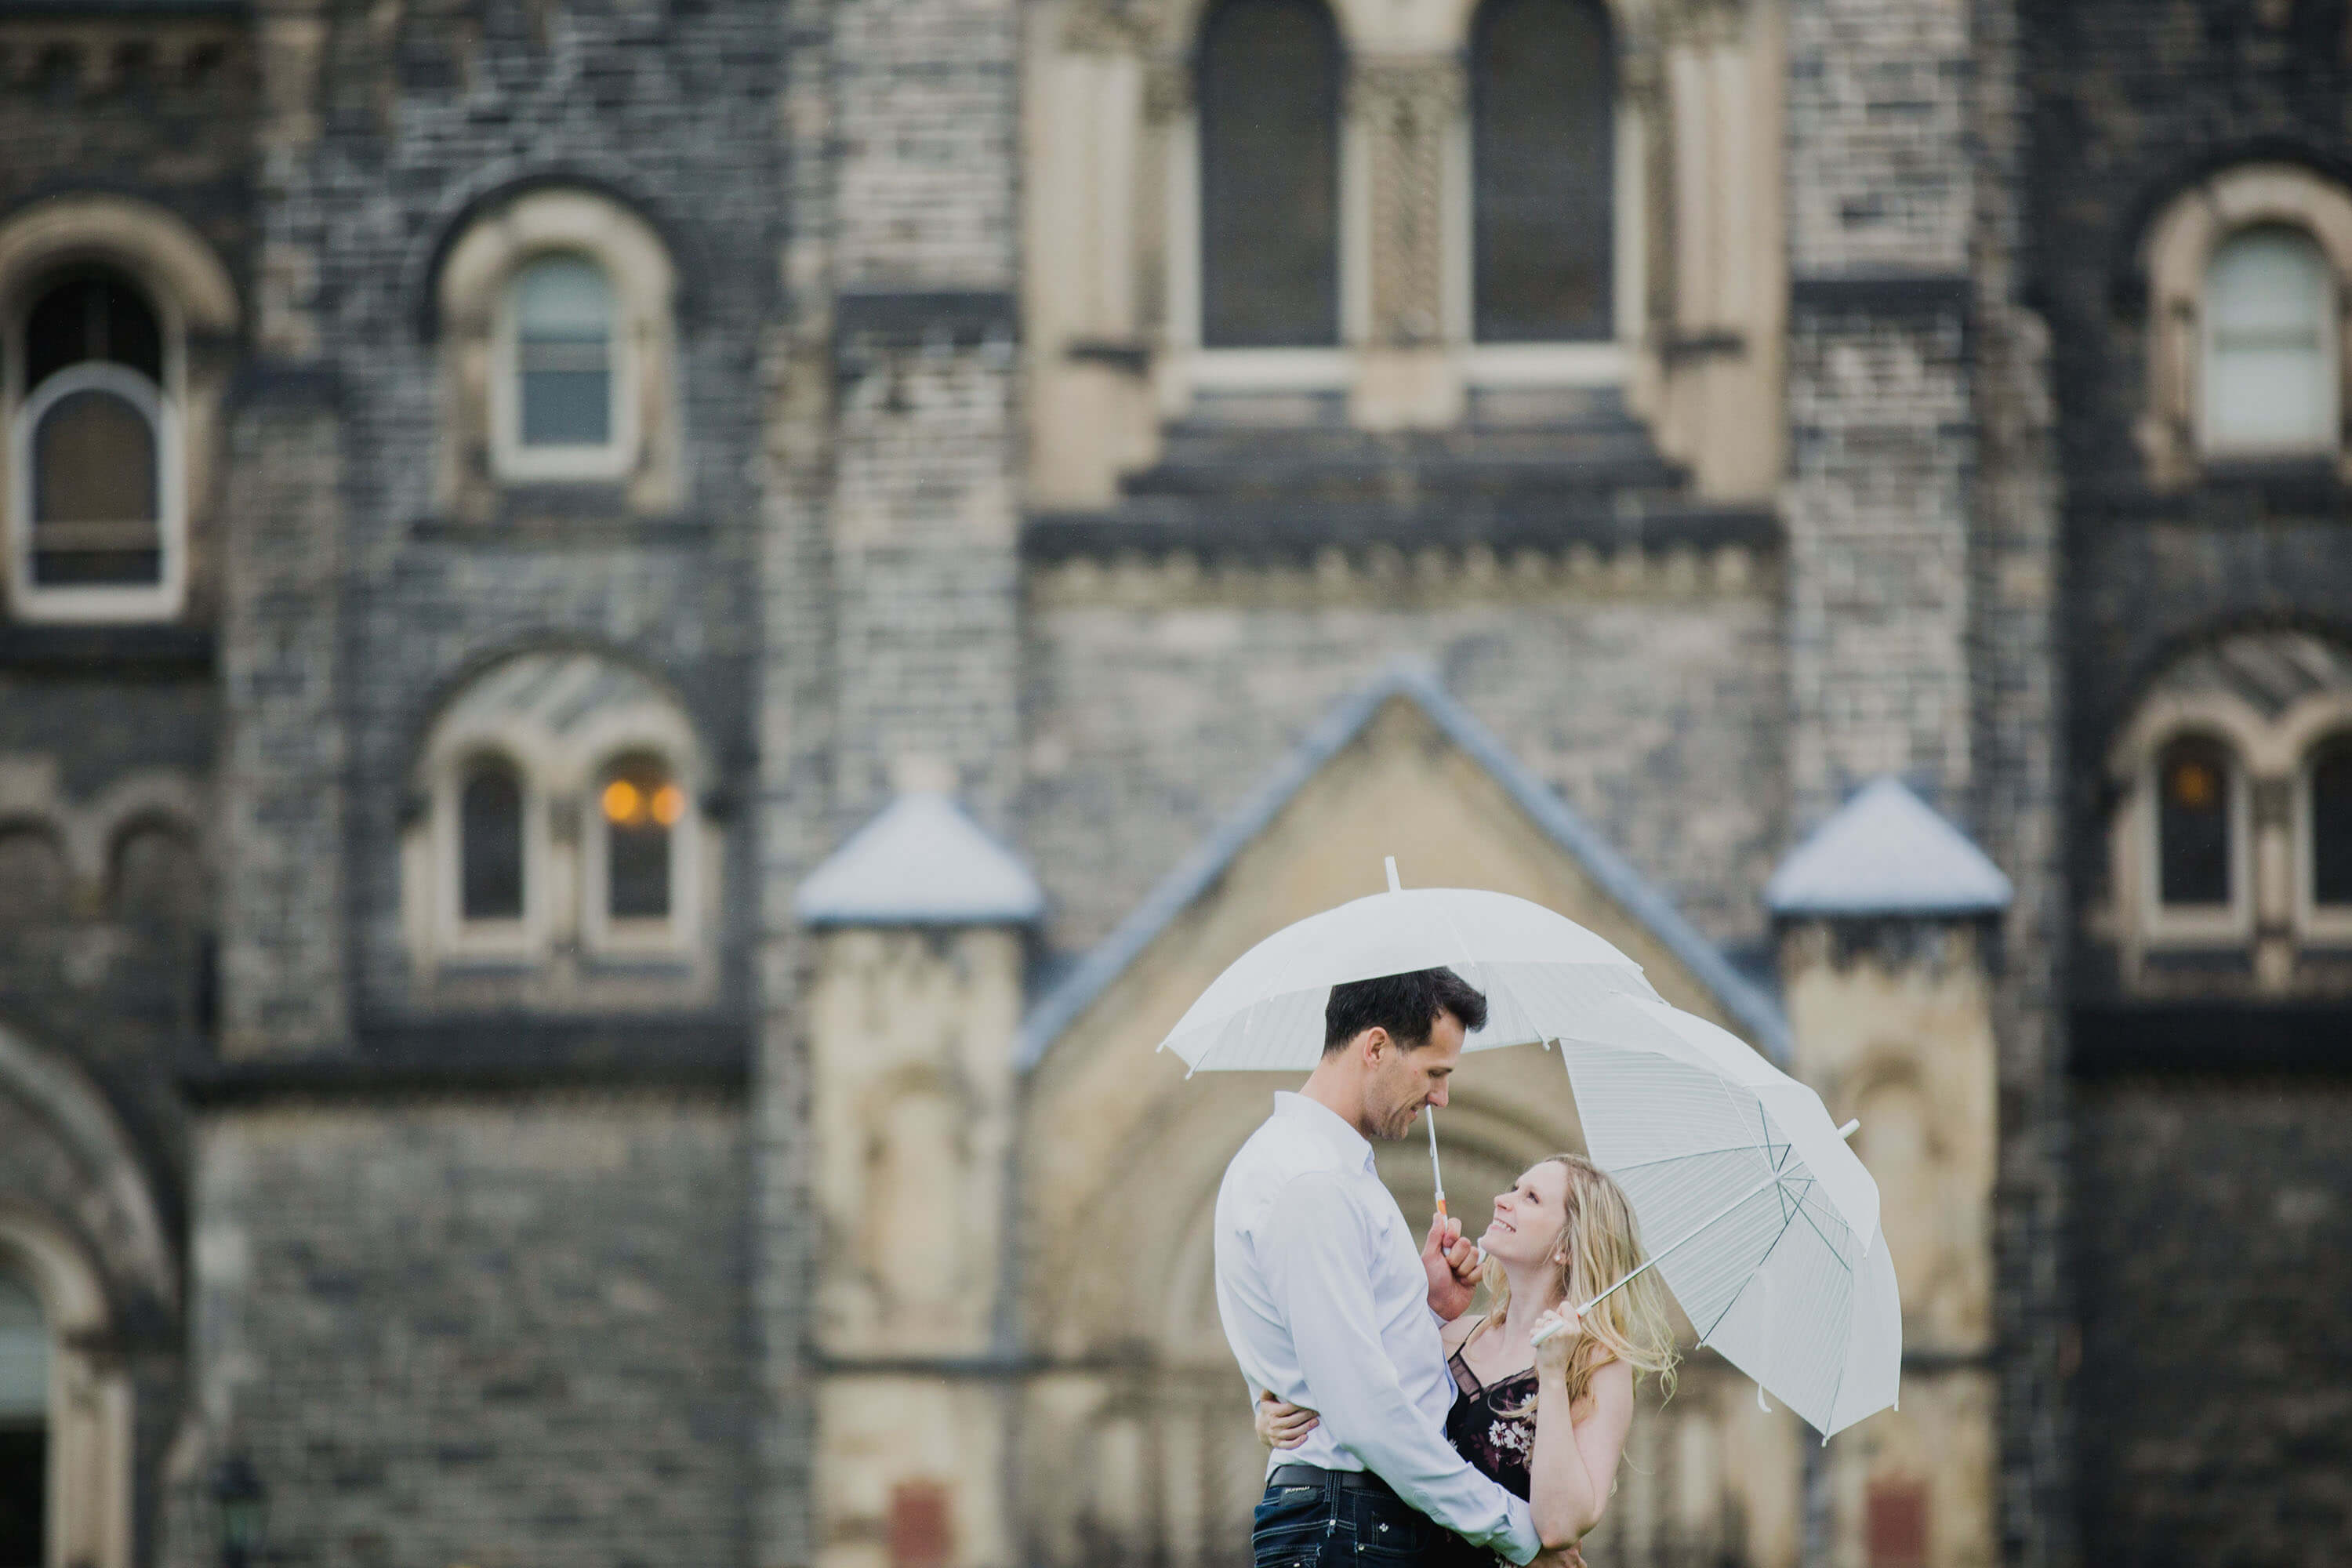 Toronto engagement session infront of stoney building. The couple poses with umbrellas to emphasize the beautiful rainy day